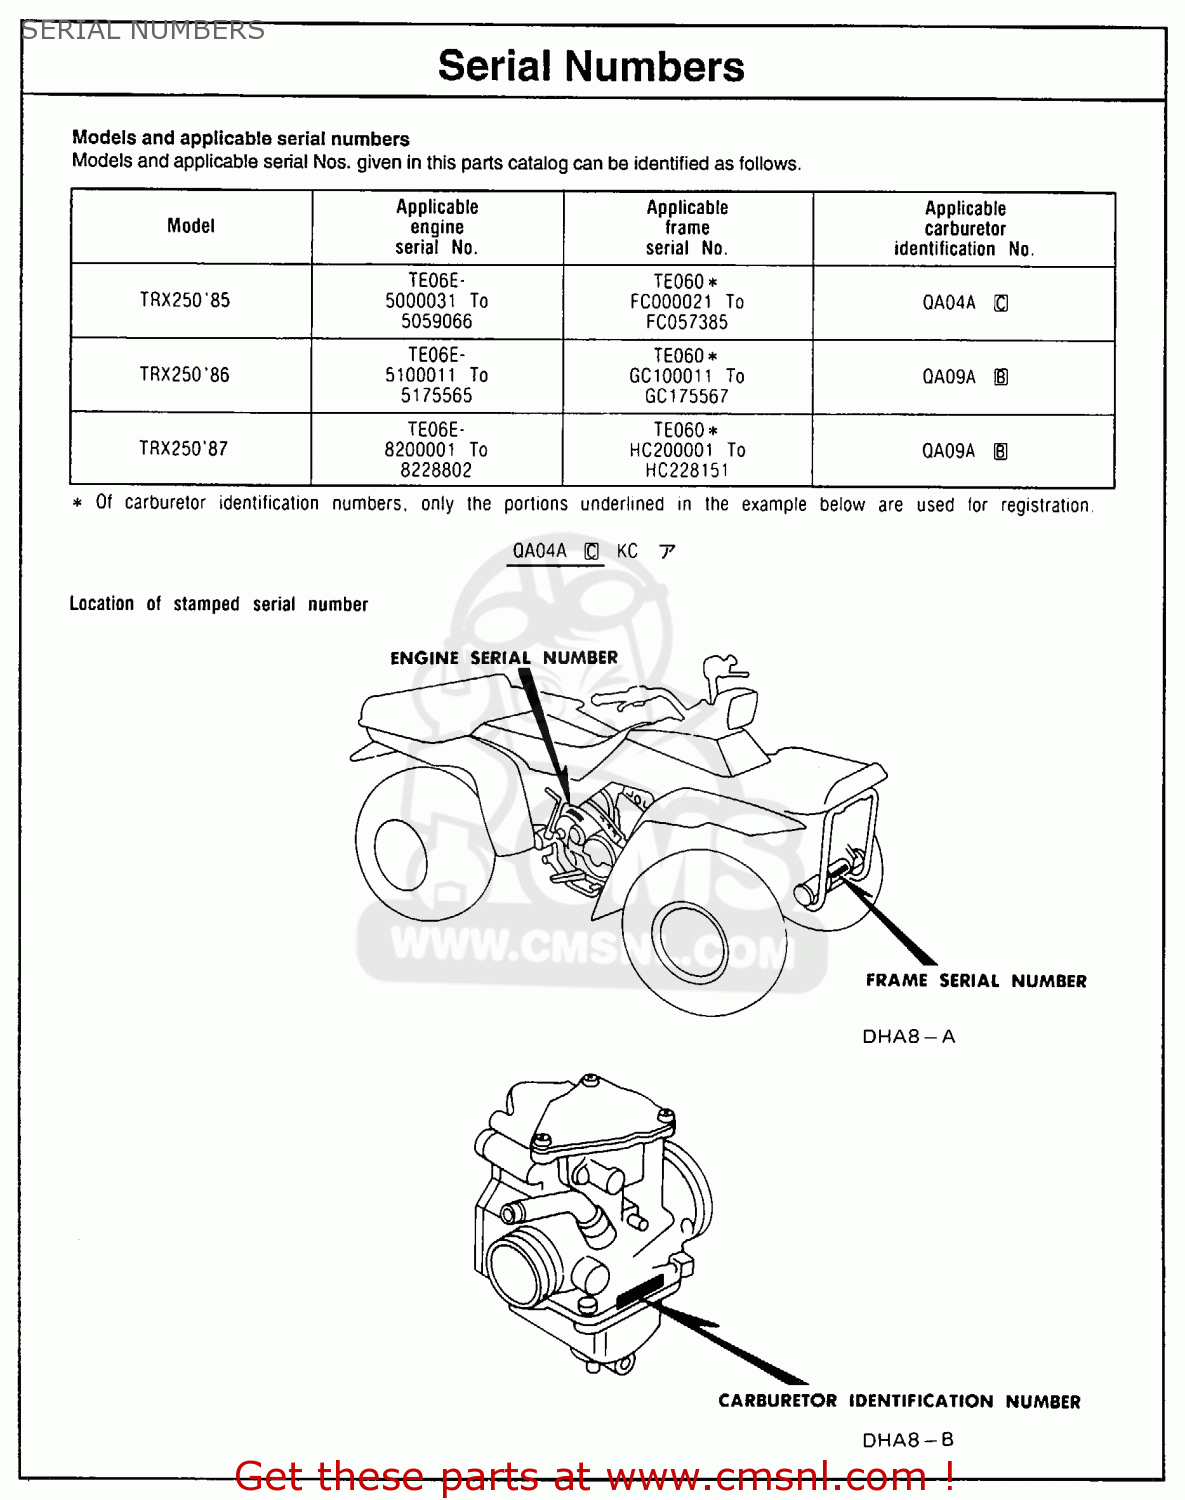 Honda TRX250 FOURTRAX 250 1985 (F) USA SERIAL NUMBERS ... sequence diagram new user 